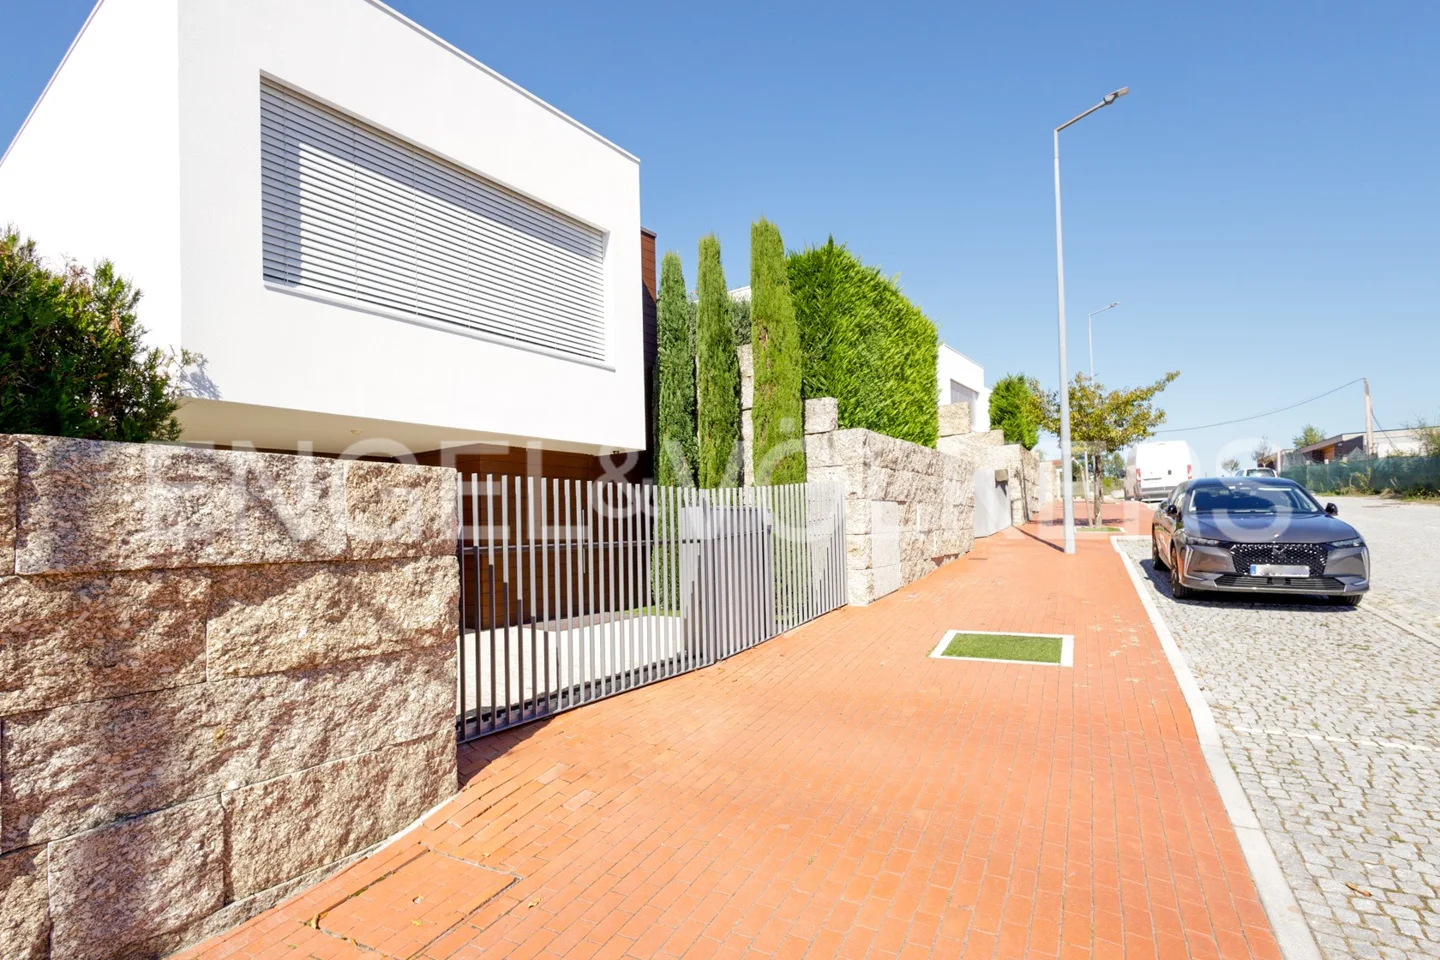 3+1 Bedroom Villa 10 minutes from the Center of Guimarães Sold Furnished